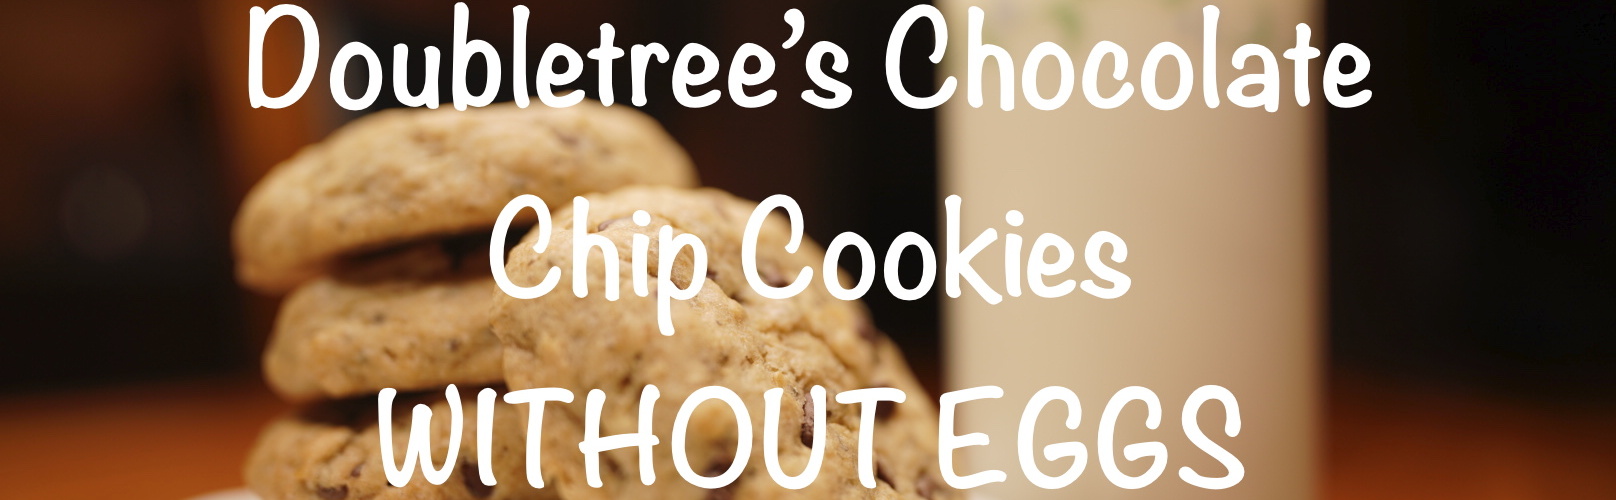 We Made Doubletree’s ‘Famous’ Chocolate Chip Cookies Eggless